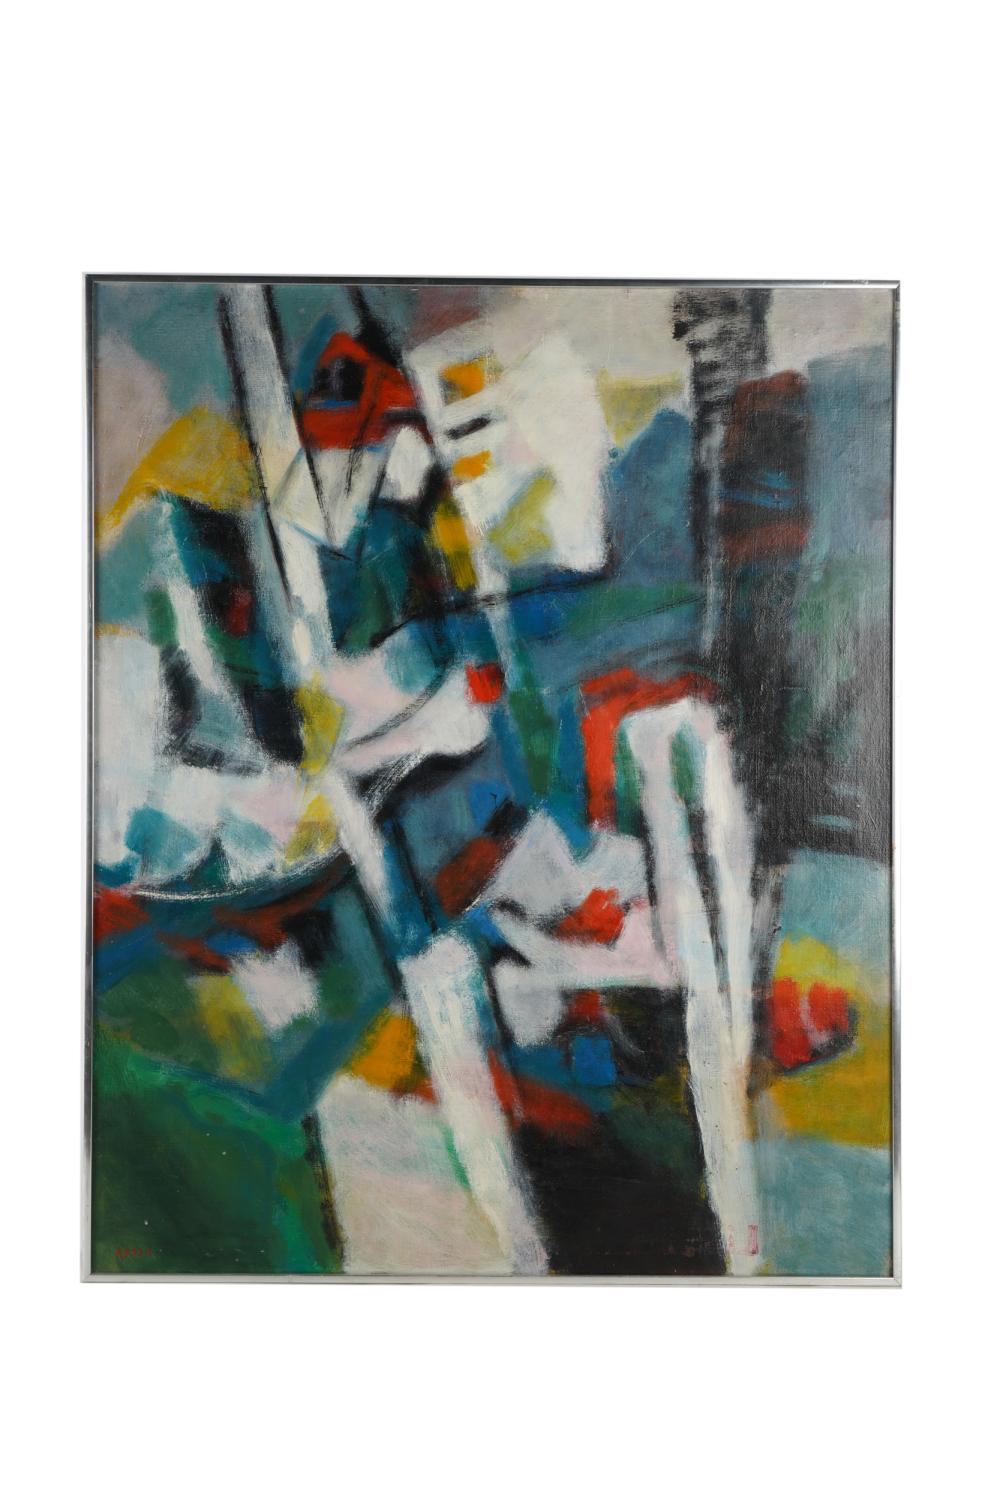 ELAINE ROSSO (20TH CENTURY): ABSTRACT